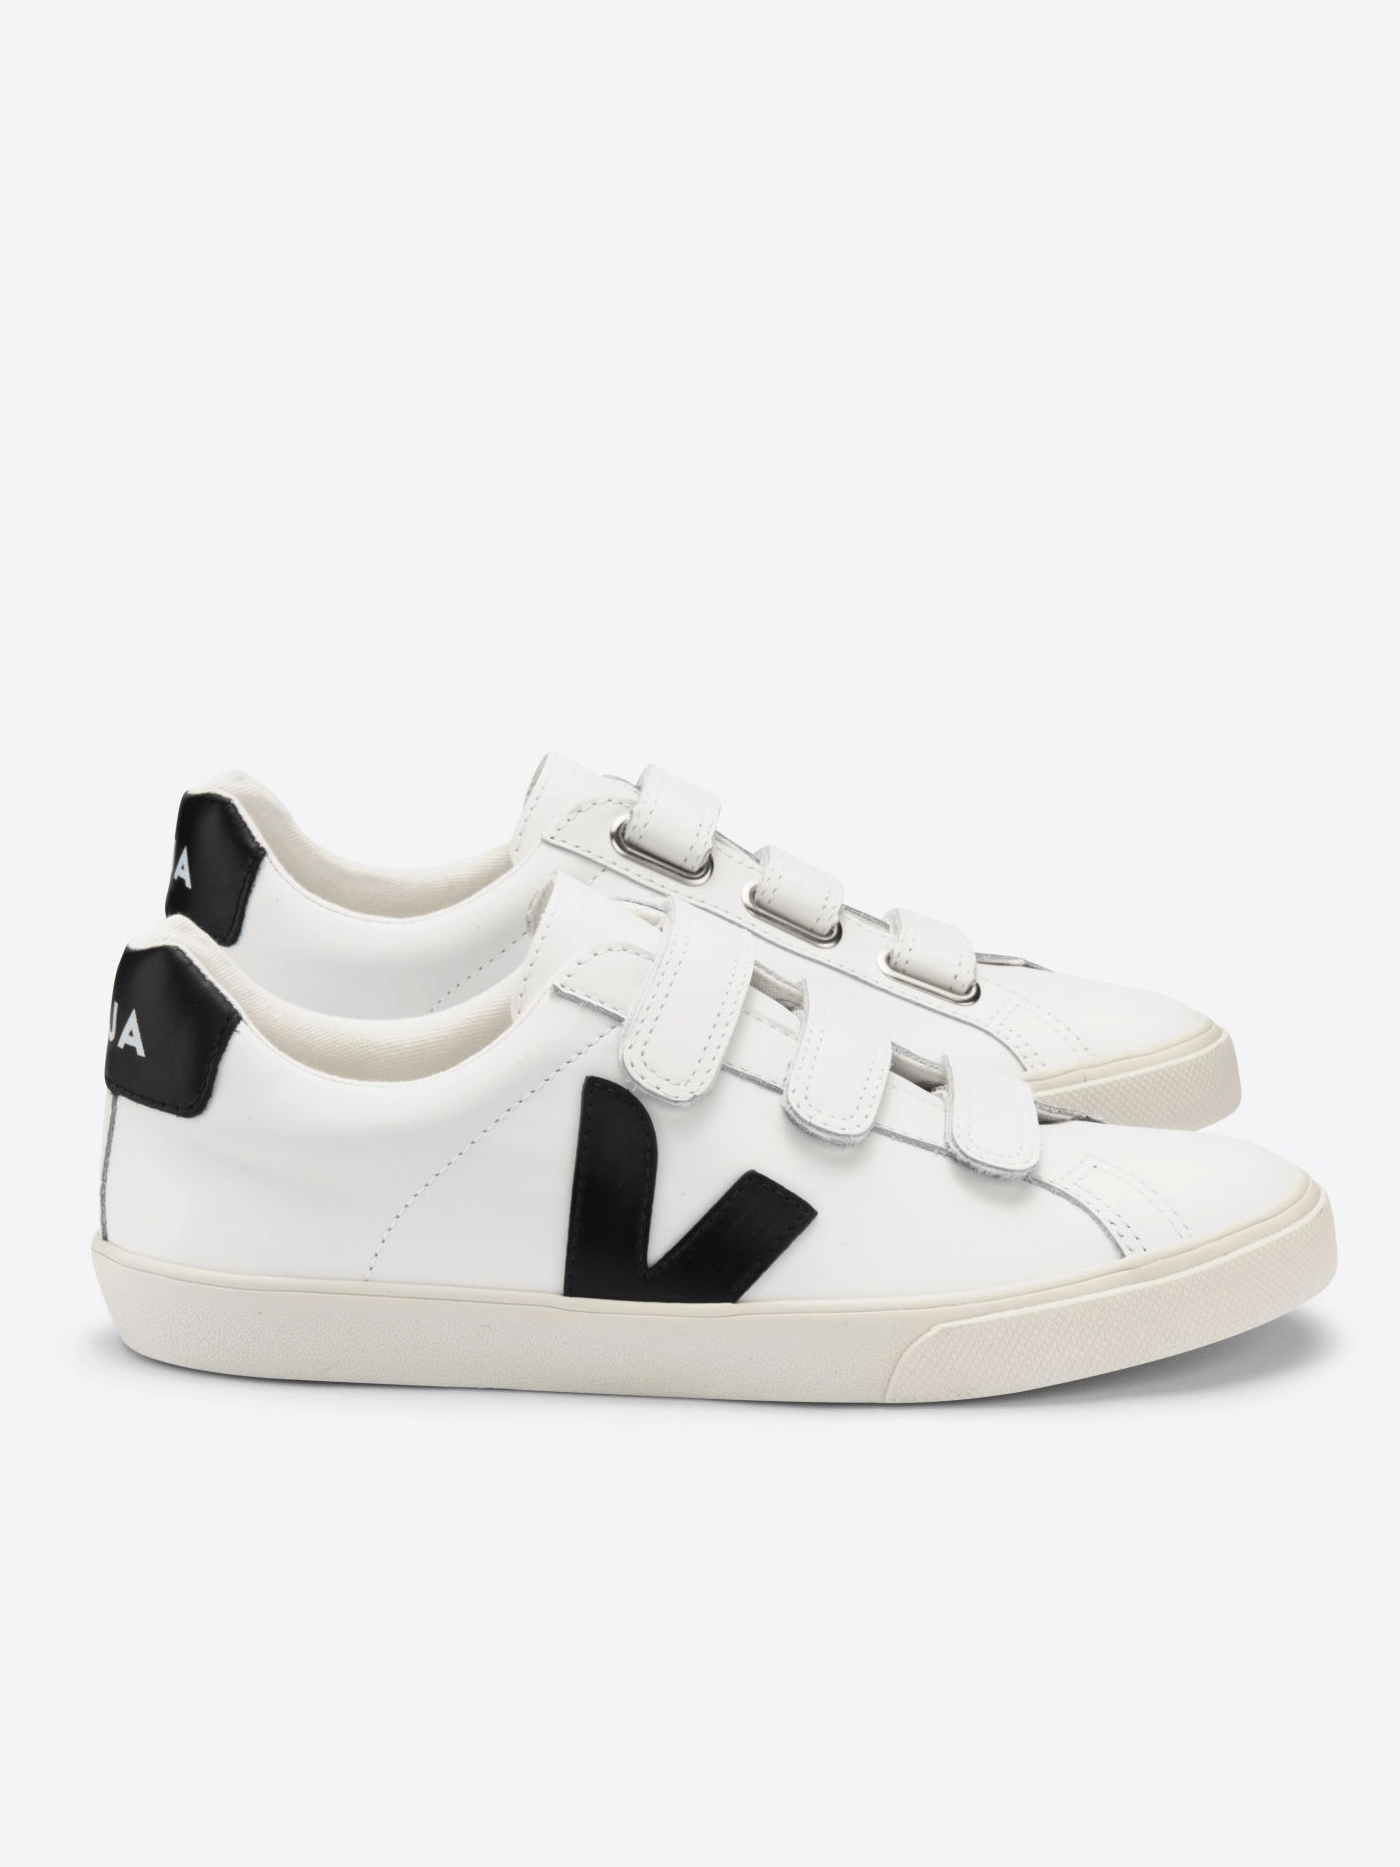 Veja Women's 3-Lock Leather Accessories - Womens - Shoes Veja